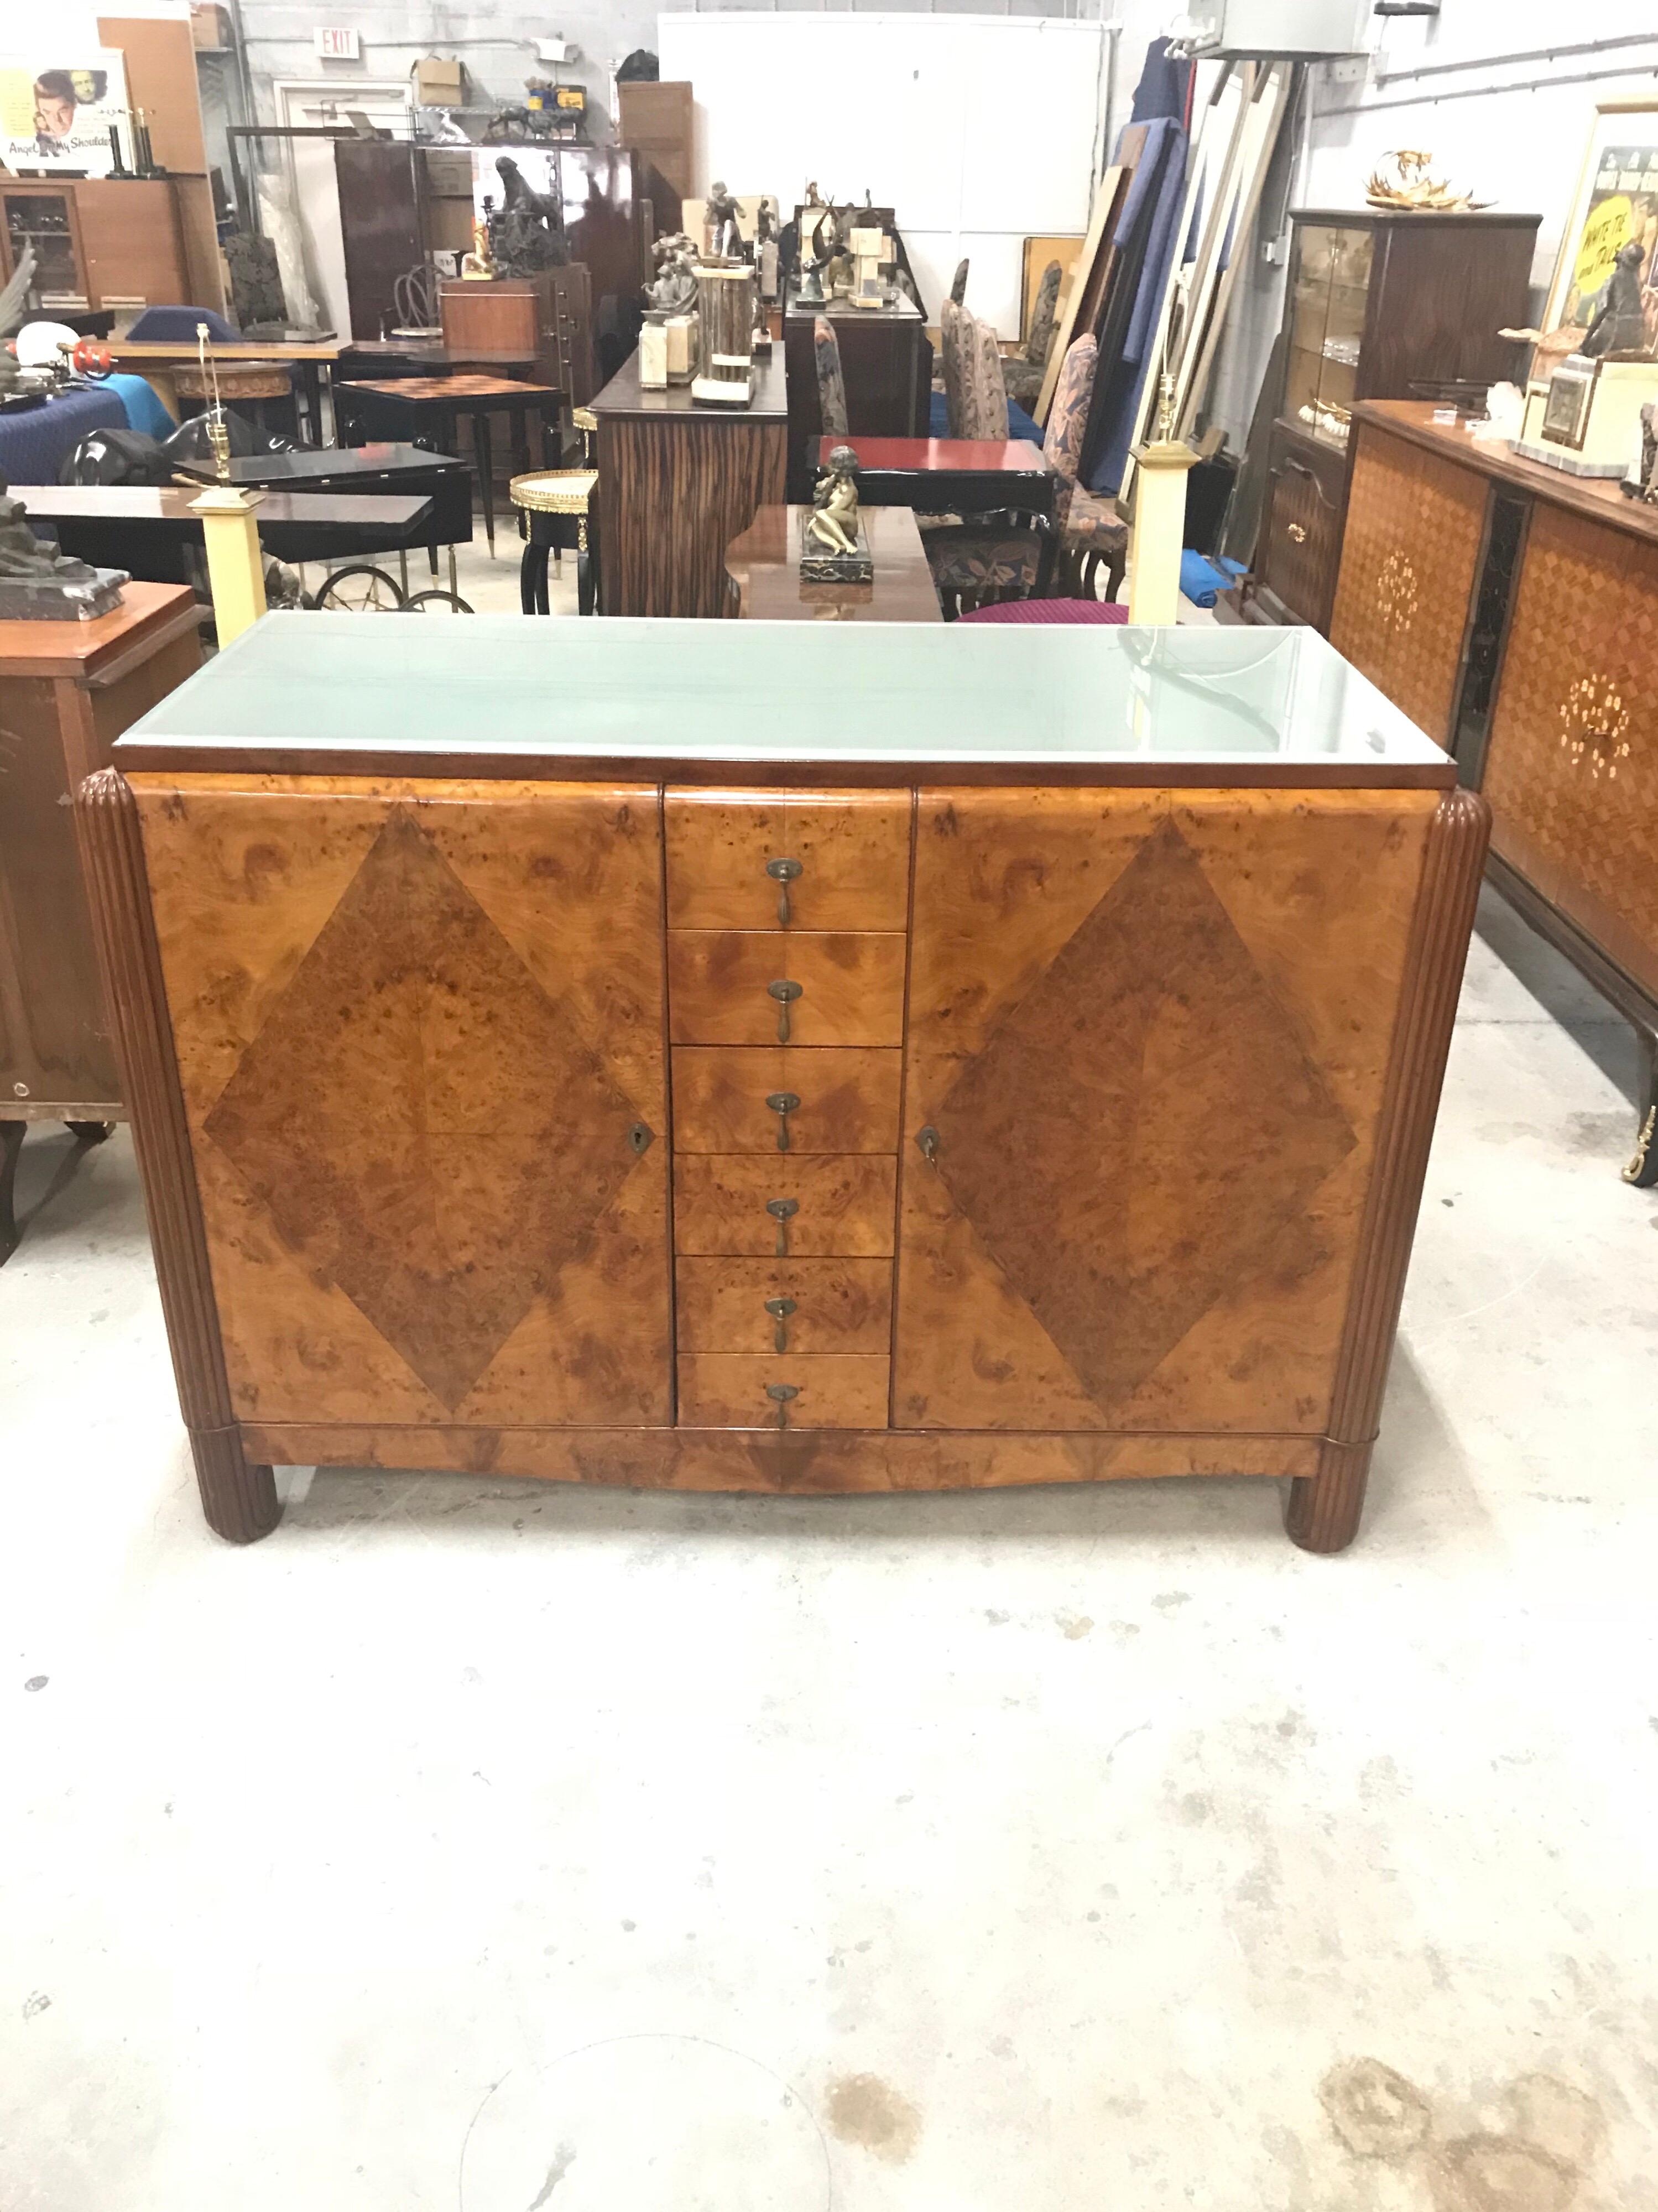 Classic French Art Deco Exotic Burl Walnut Sideboard / Buffet , circa 1940s. the sideboard are in very good condition ,beautiful art frosted glass top ,With 6 long drawers in the center, with 4 long drawers in the left side and 4 long drawers in the